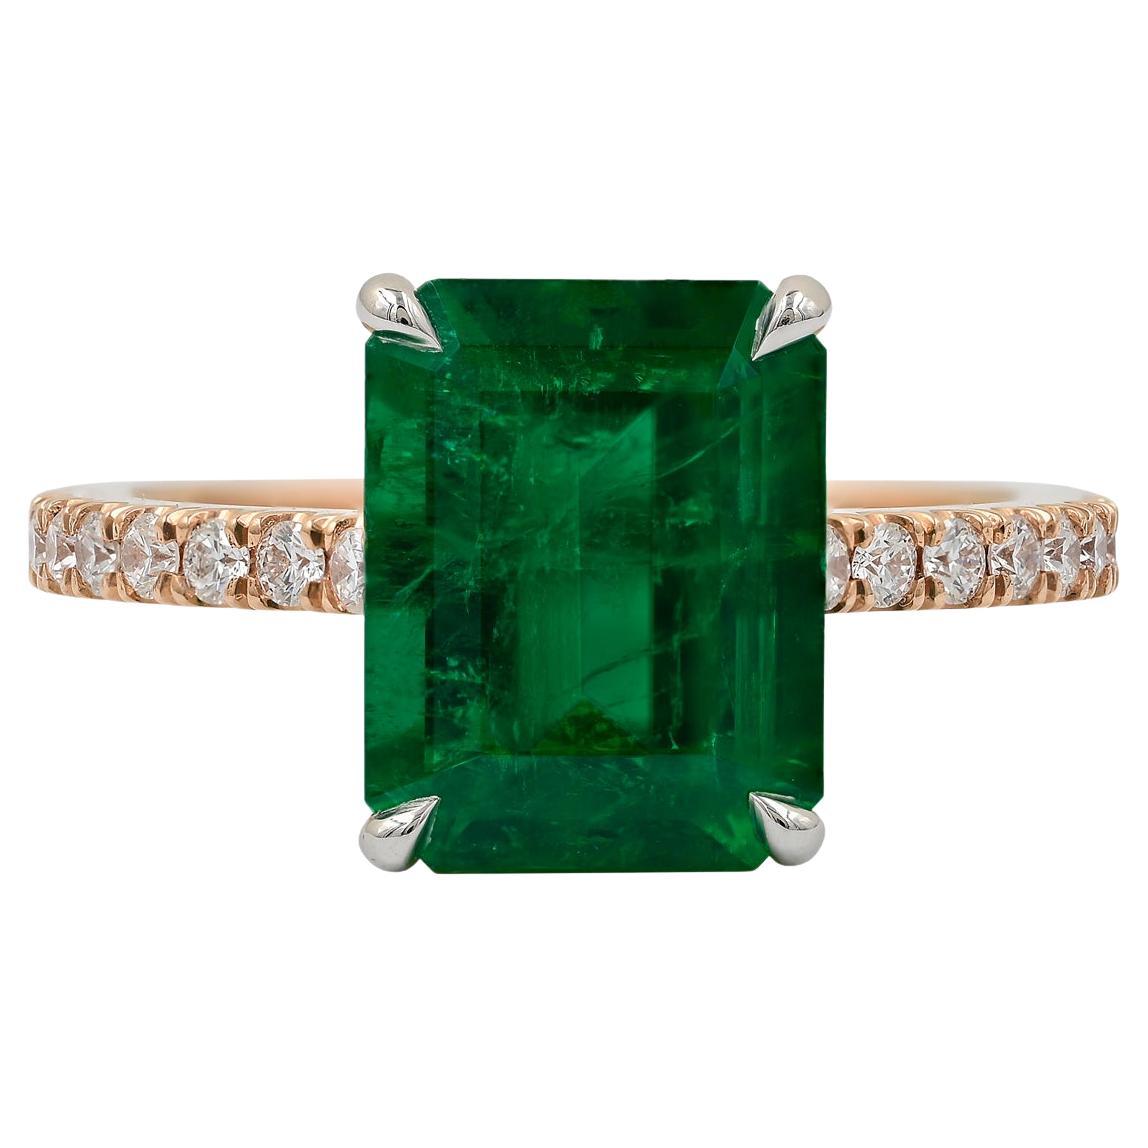 Spectra Fine Jewelry GRS Certified 3.22 Carat Himalayan Emerald Diamond Ring For Sale